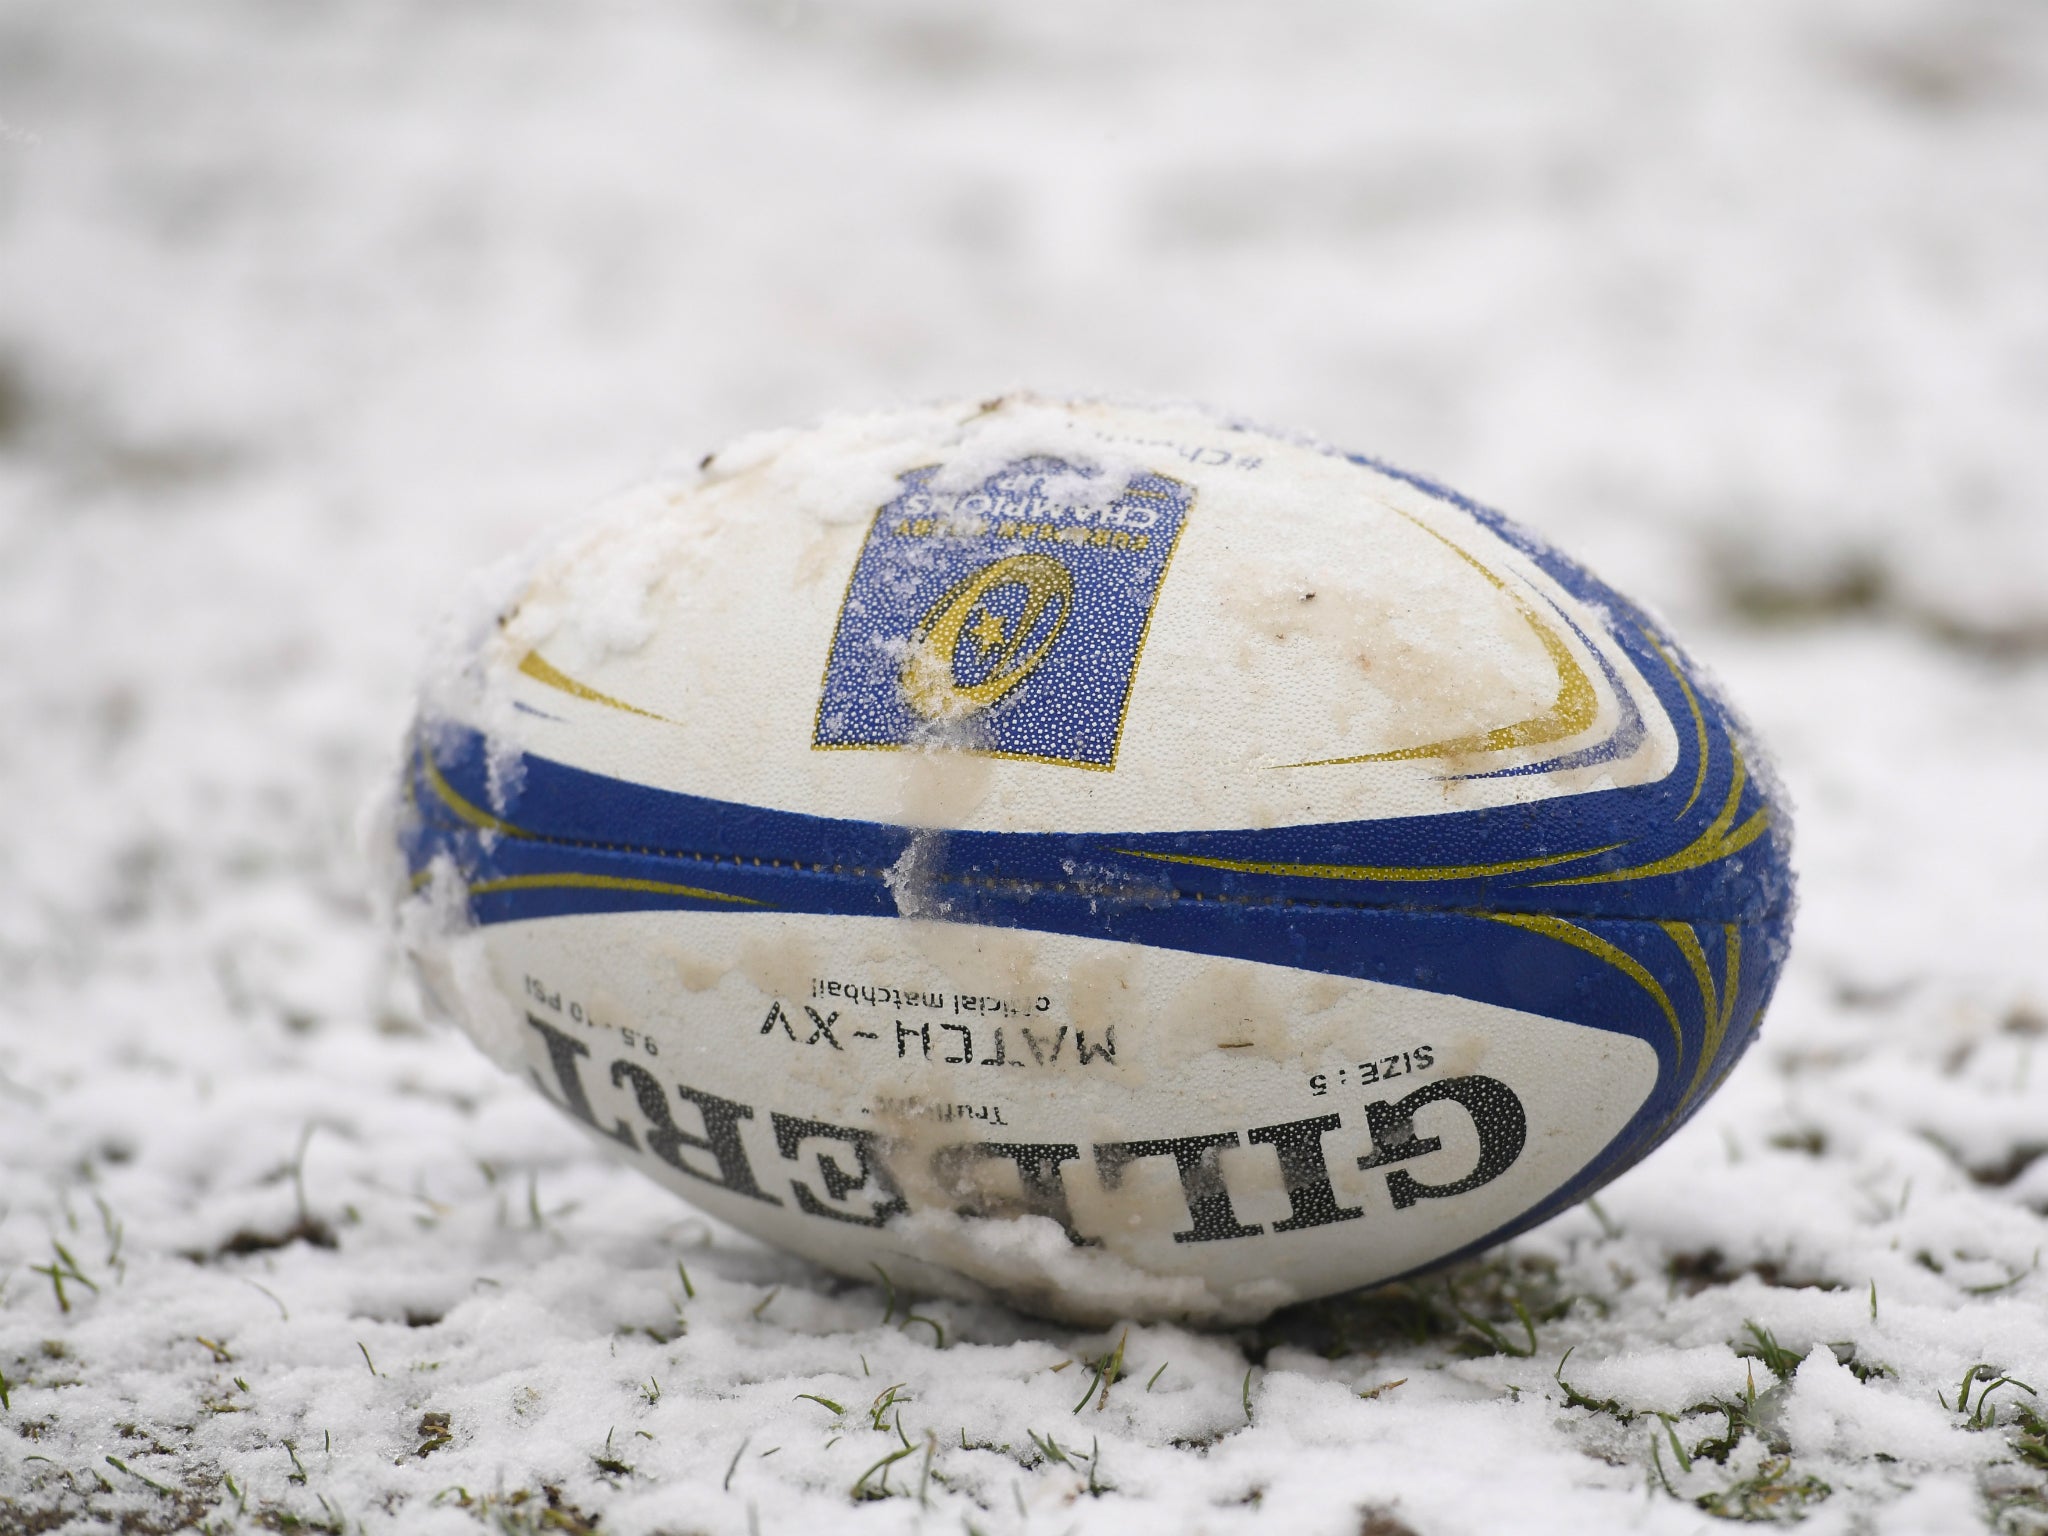 Premiership games are likely to go ahead but the Pro14 games have already been called off